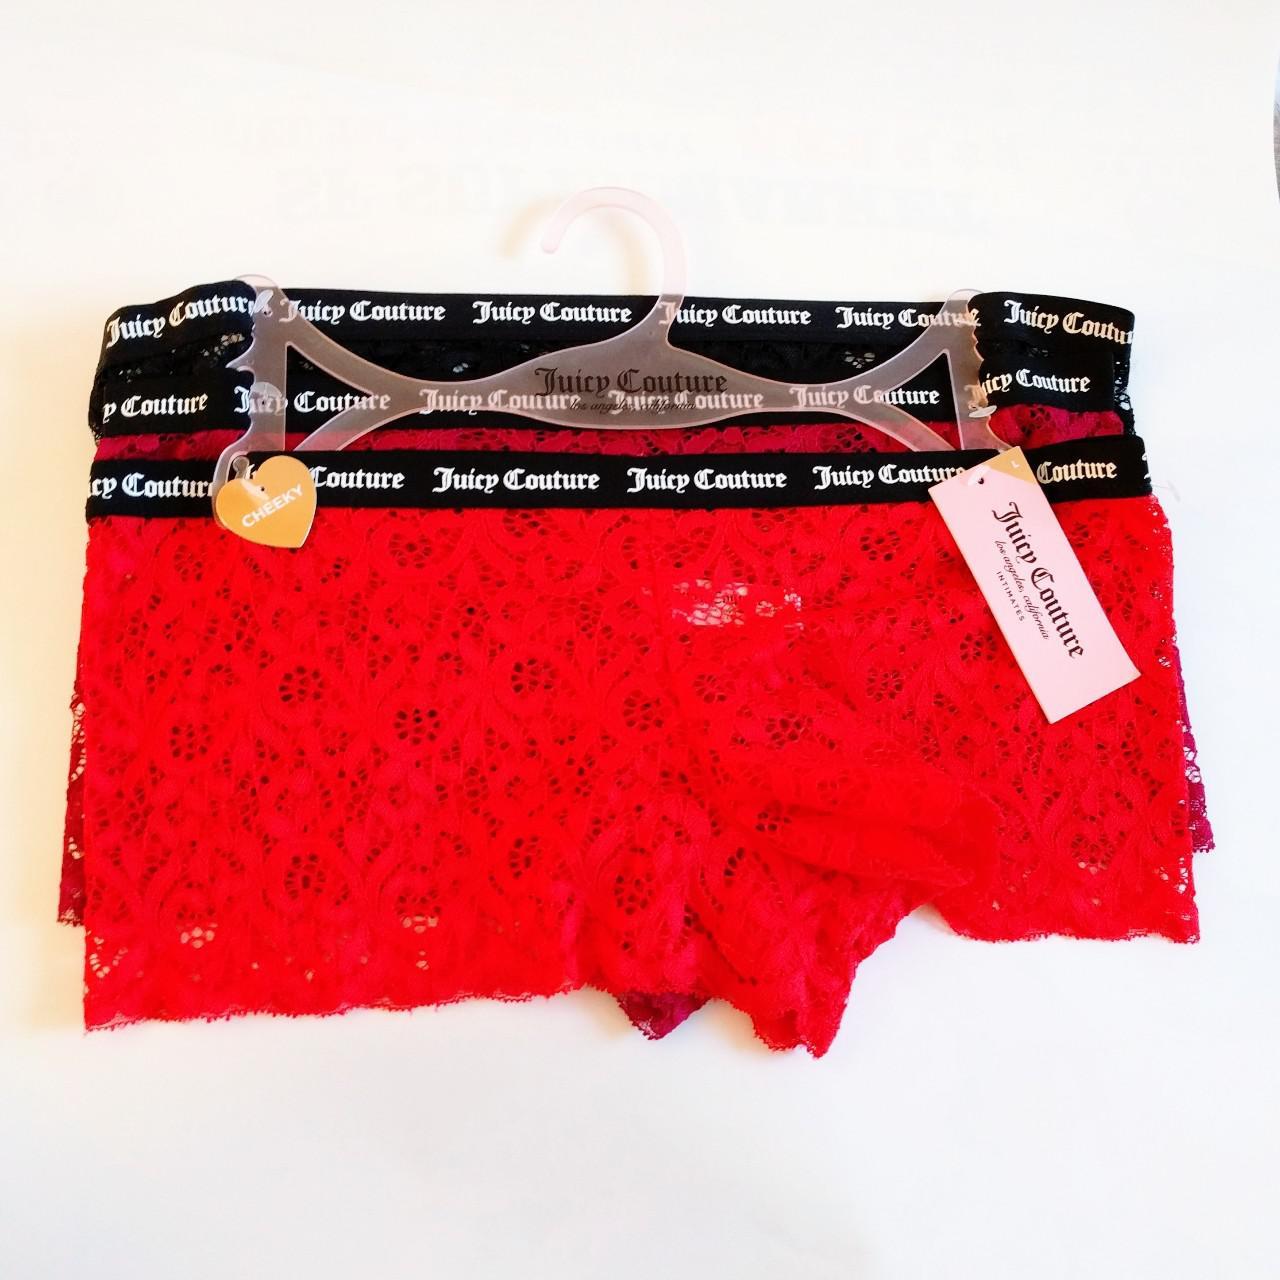 New with tags. Juicy Couture Intimate Panties. - Depop